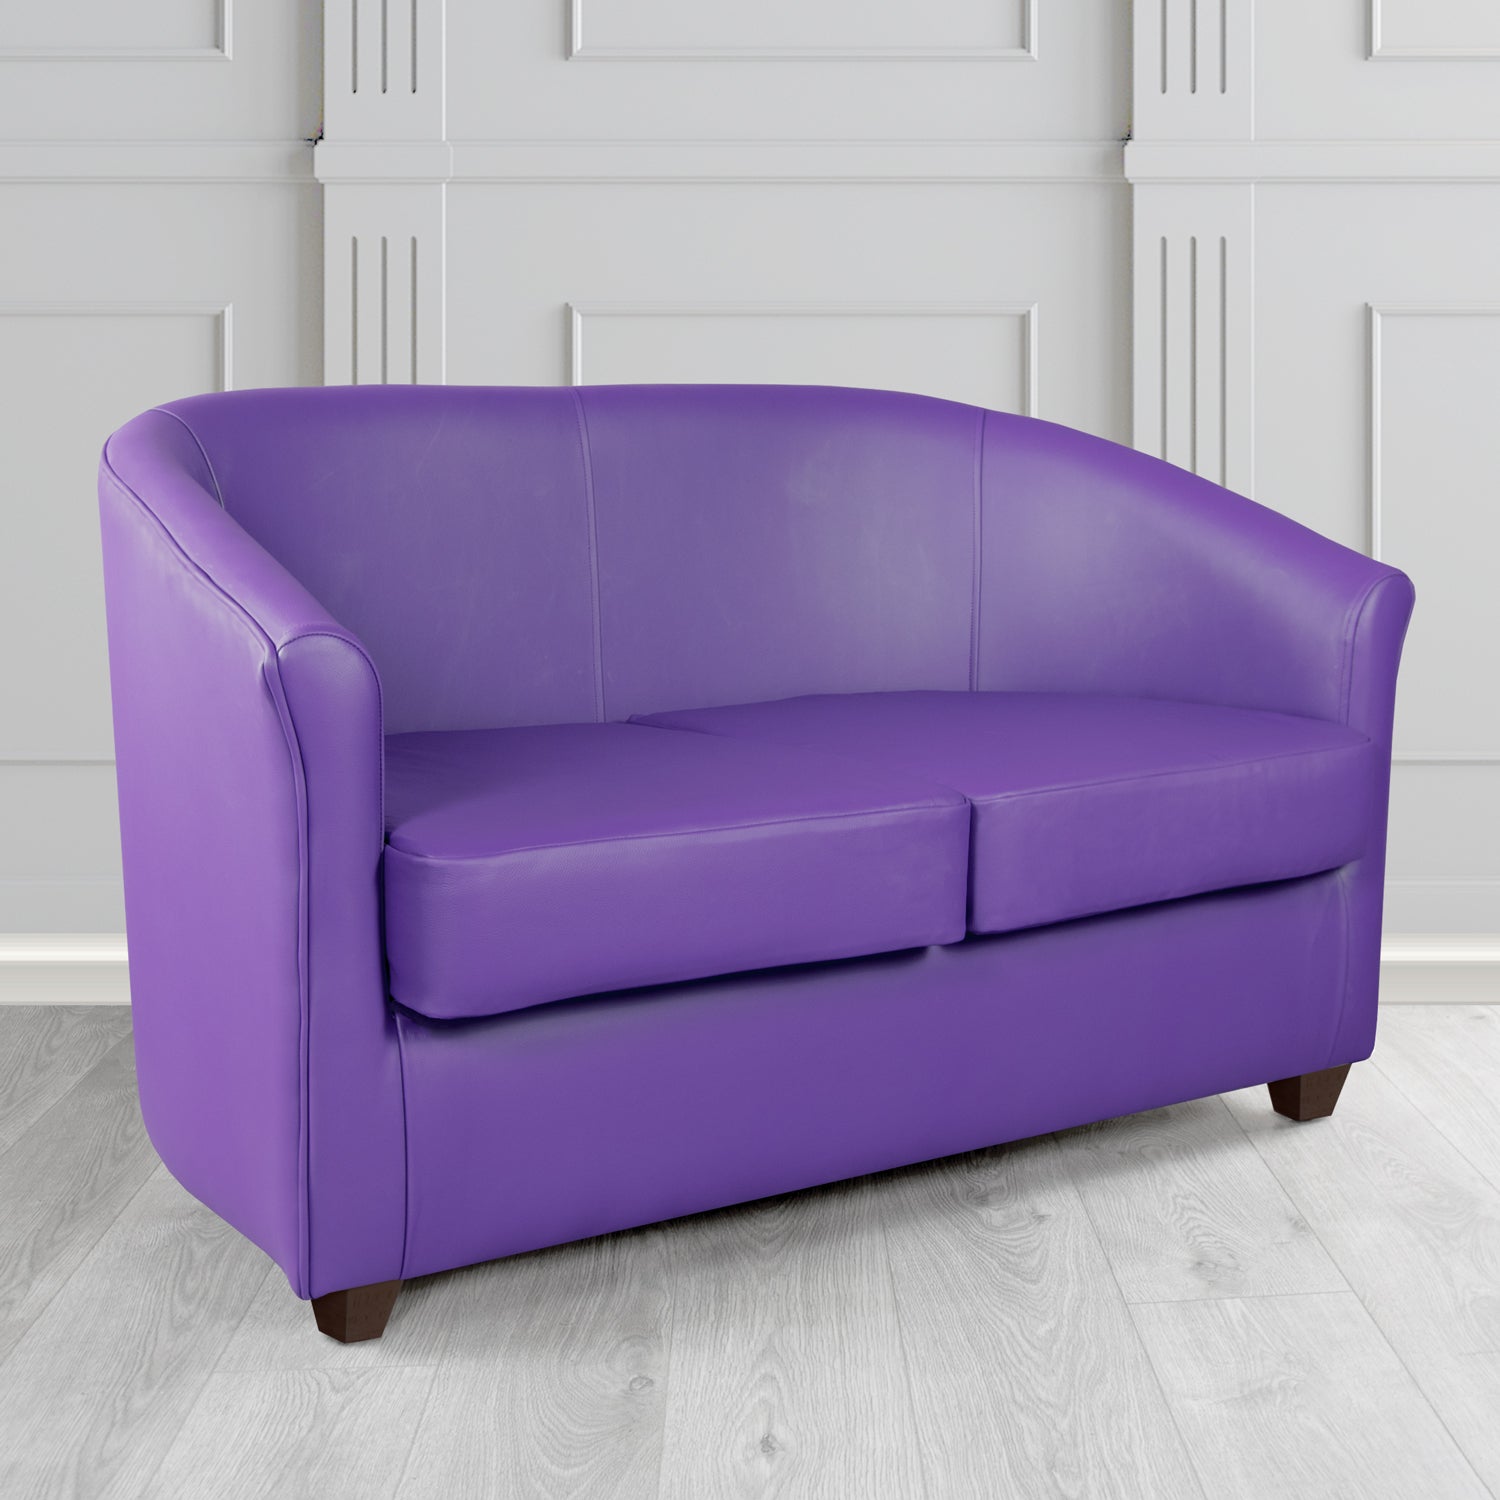 Cannes 2 Seater Tub Sofa in Just Colour Ultraviolet Crib 5 Faux Leather - The Tub Chair Shop